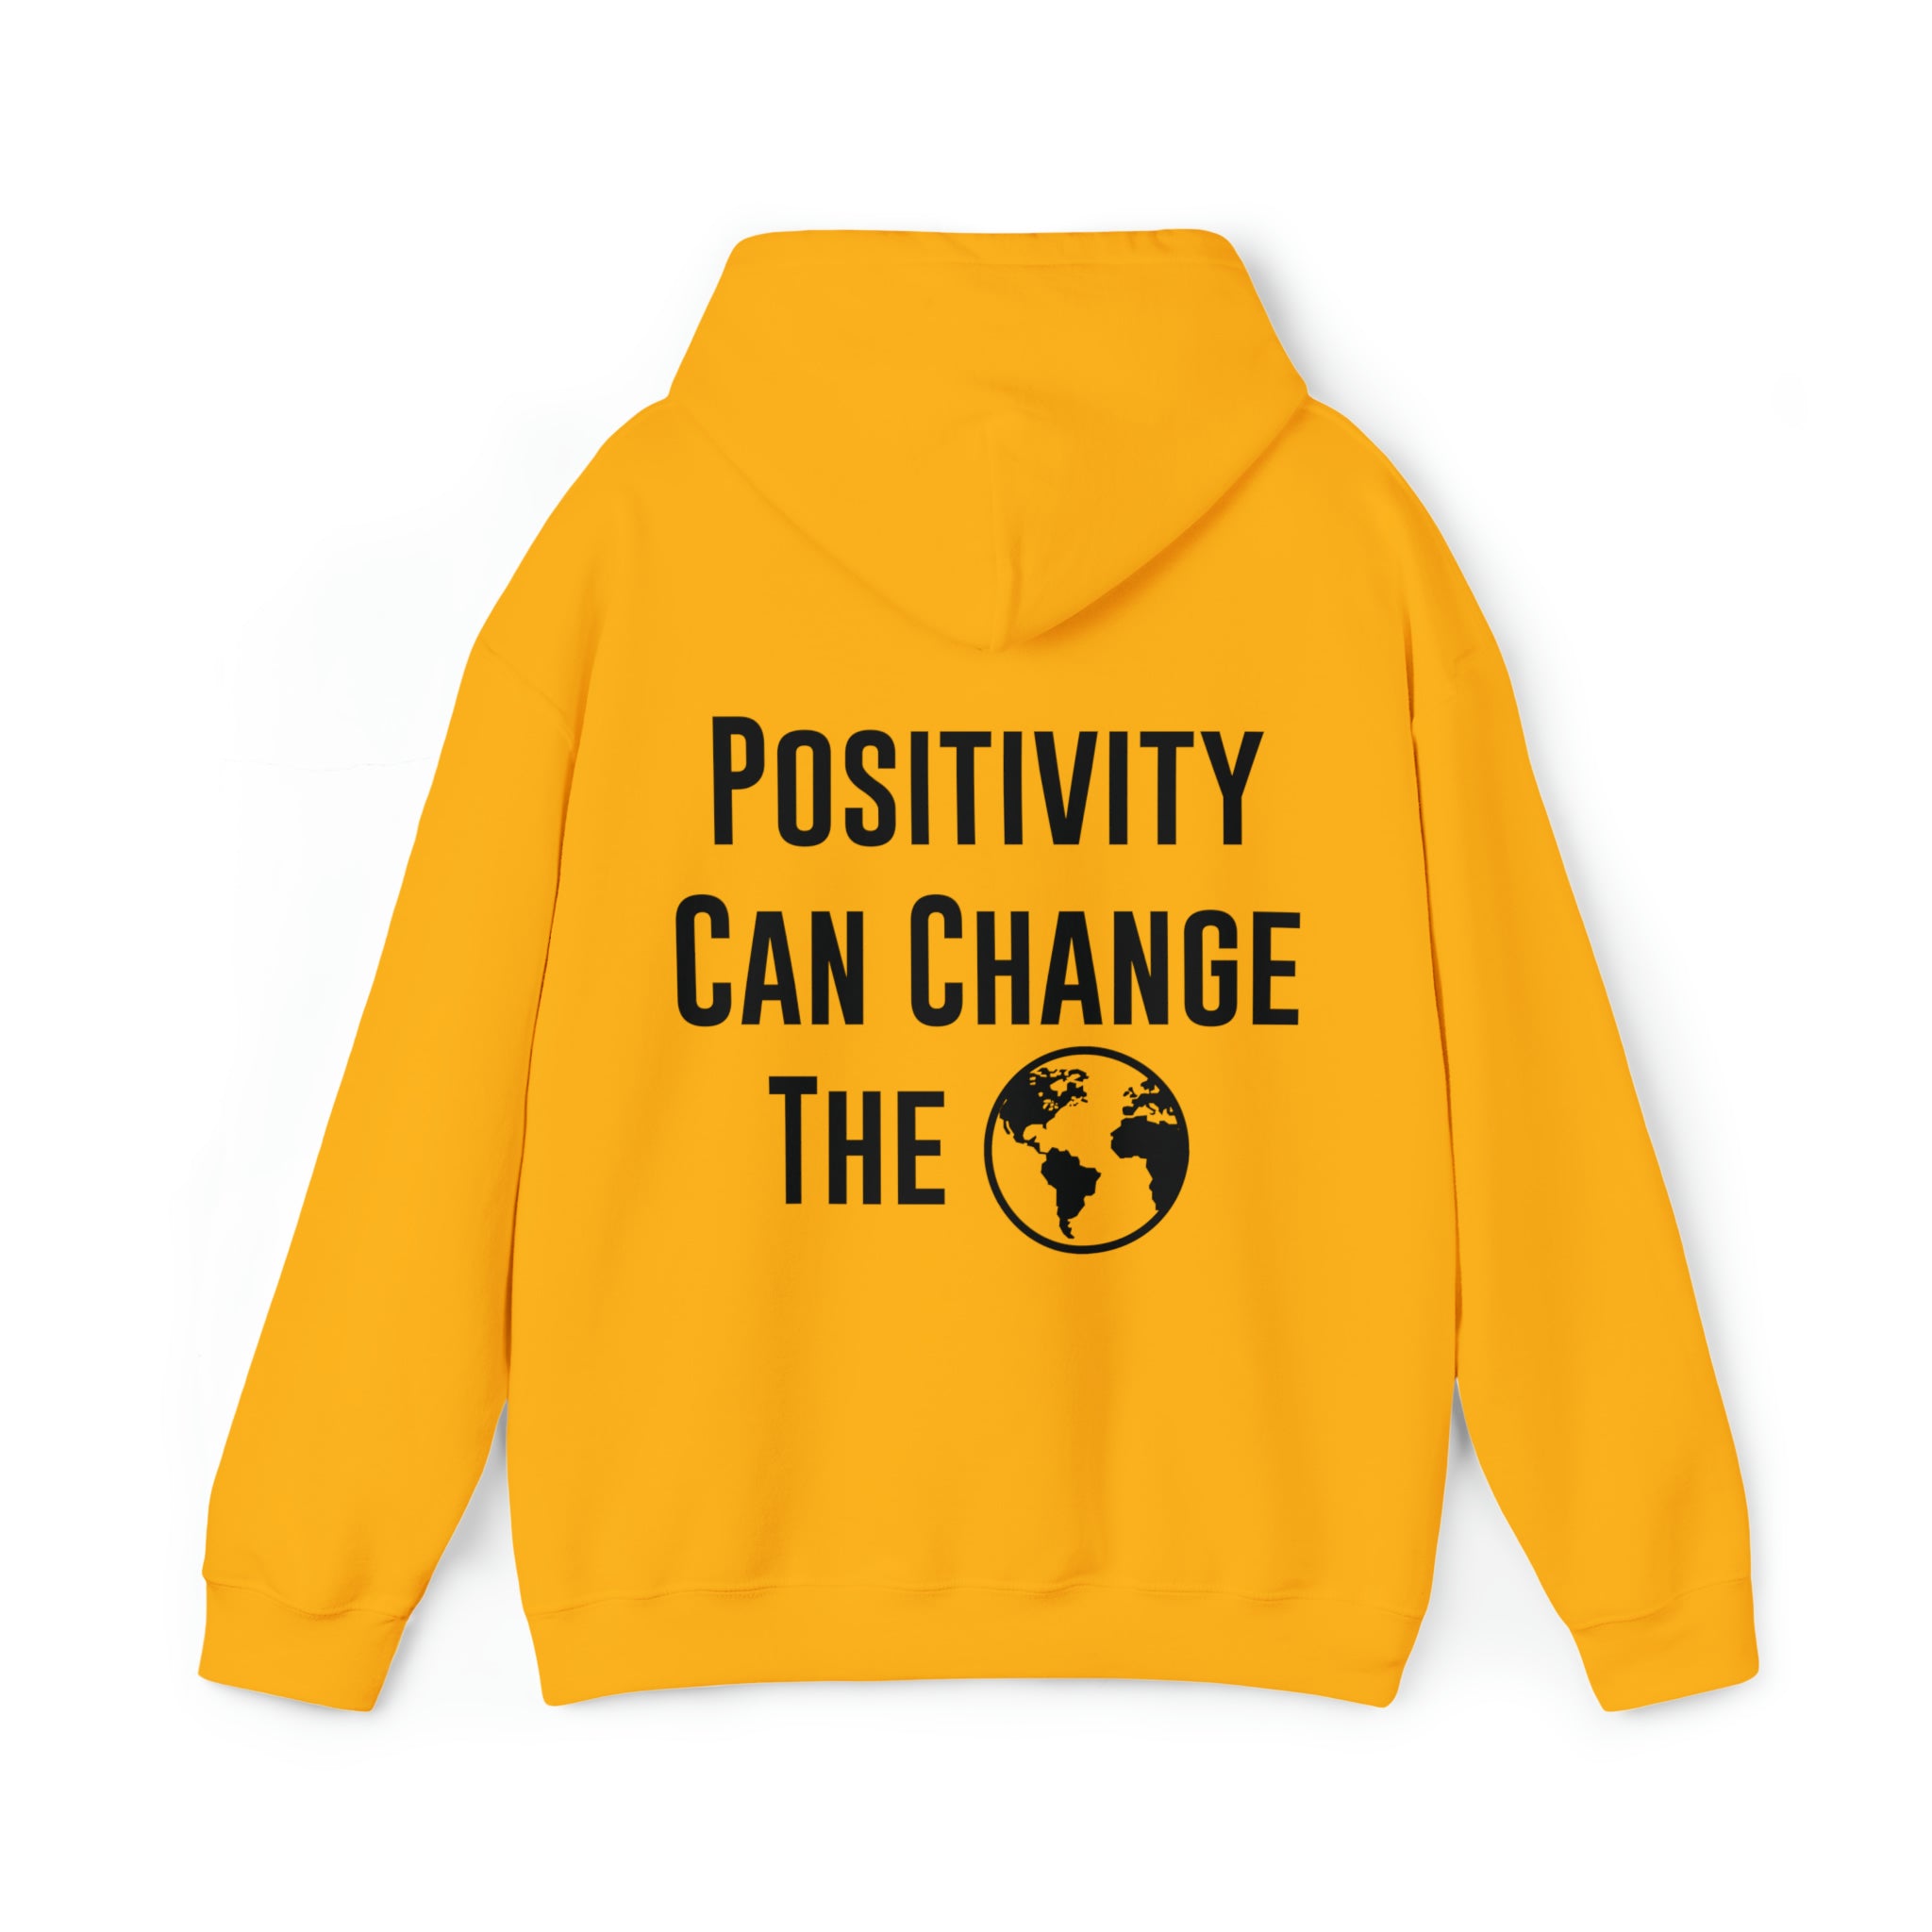 Positivity Can Change The World Hoodie